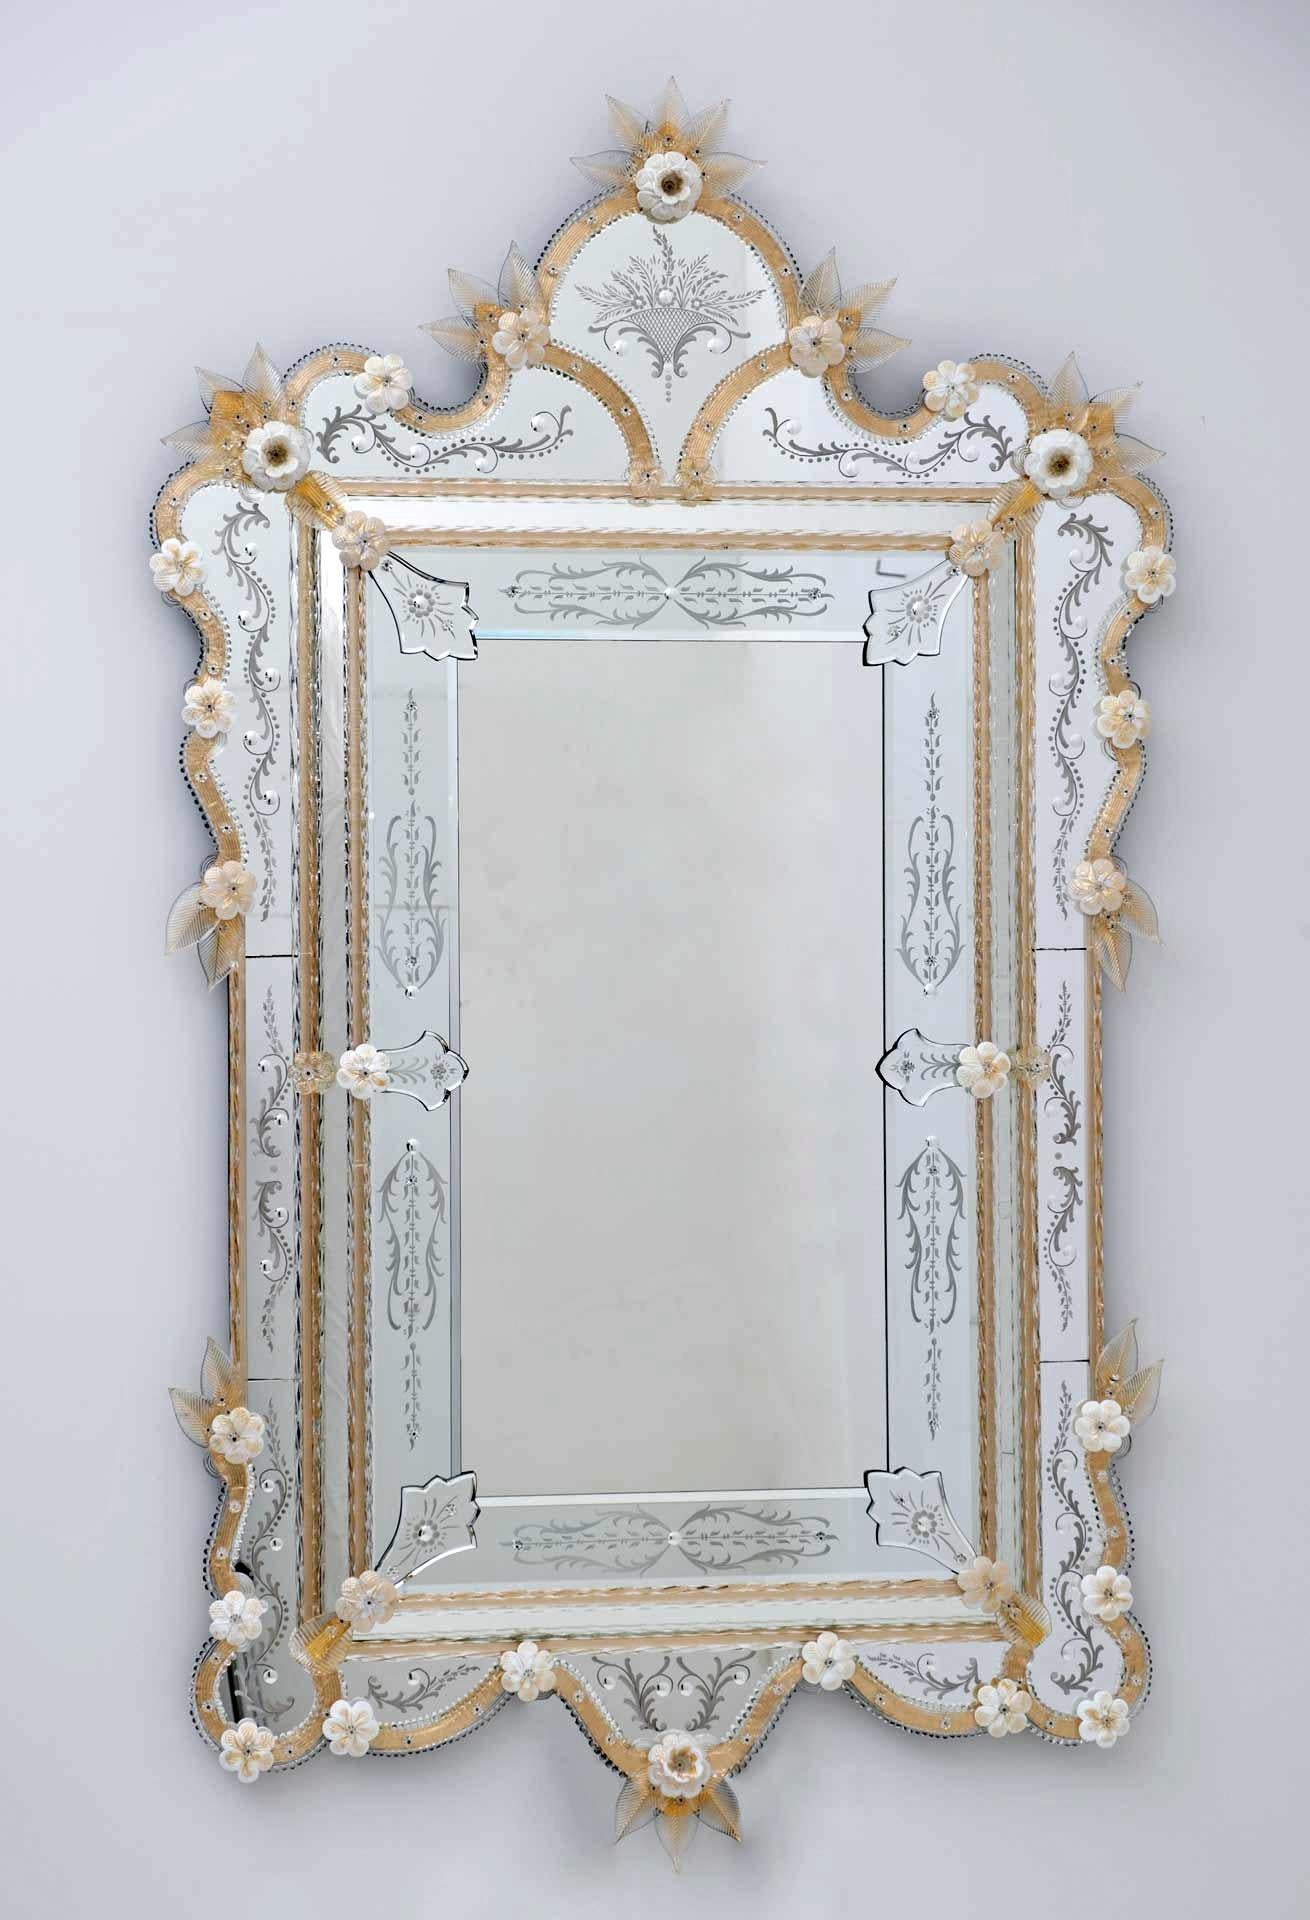 It is a delightful classic Venetian mirror from the island of Murano in gold color with white gold flower finish, engraved and worked entirely by hand according to the Murano tradition, with rounded and hand-engraved parts in the corners. A